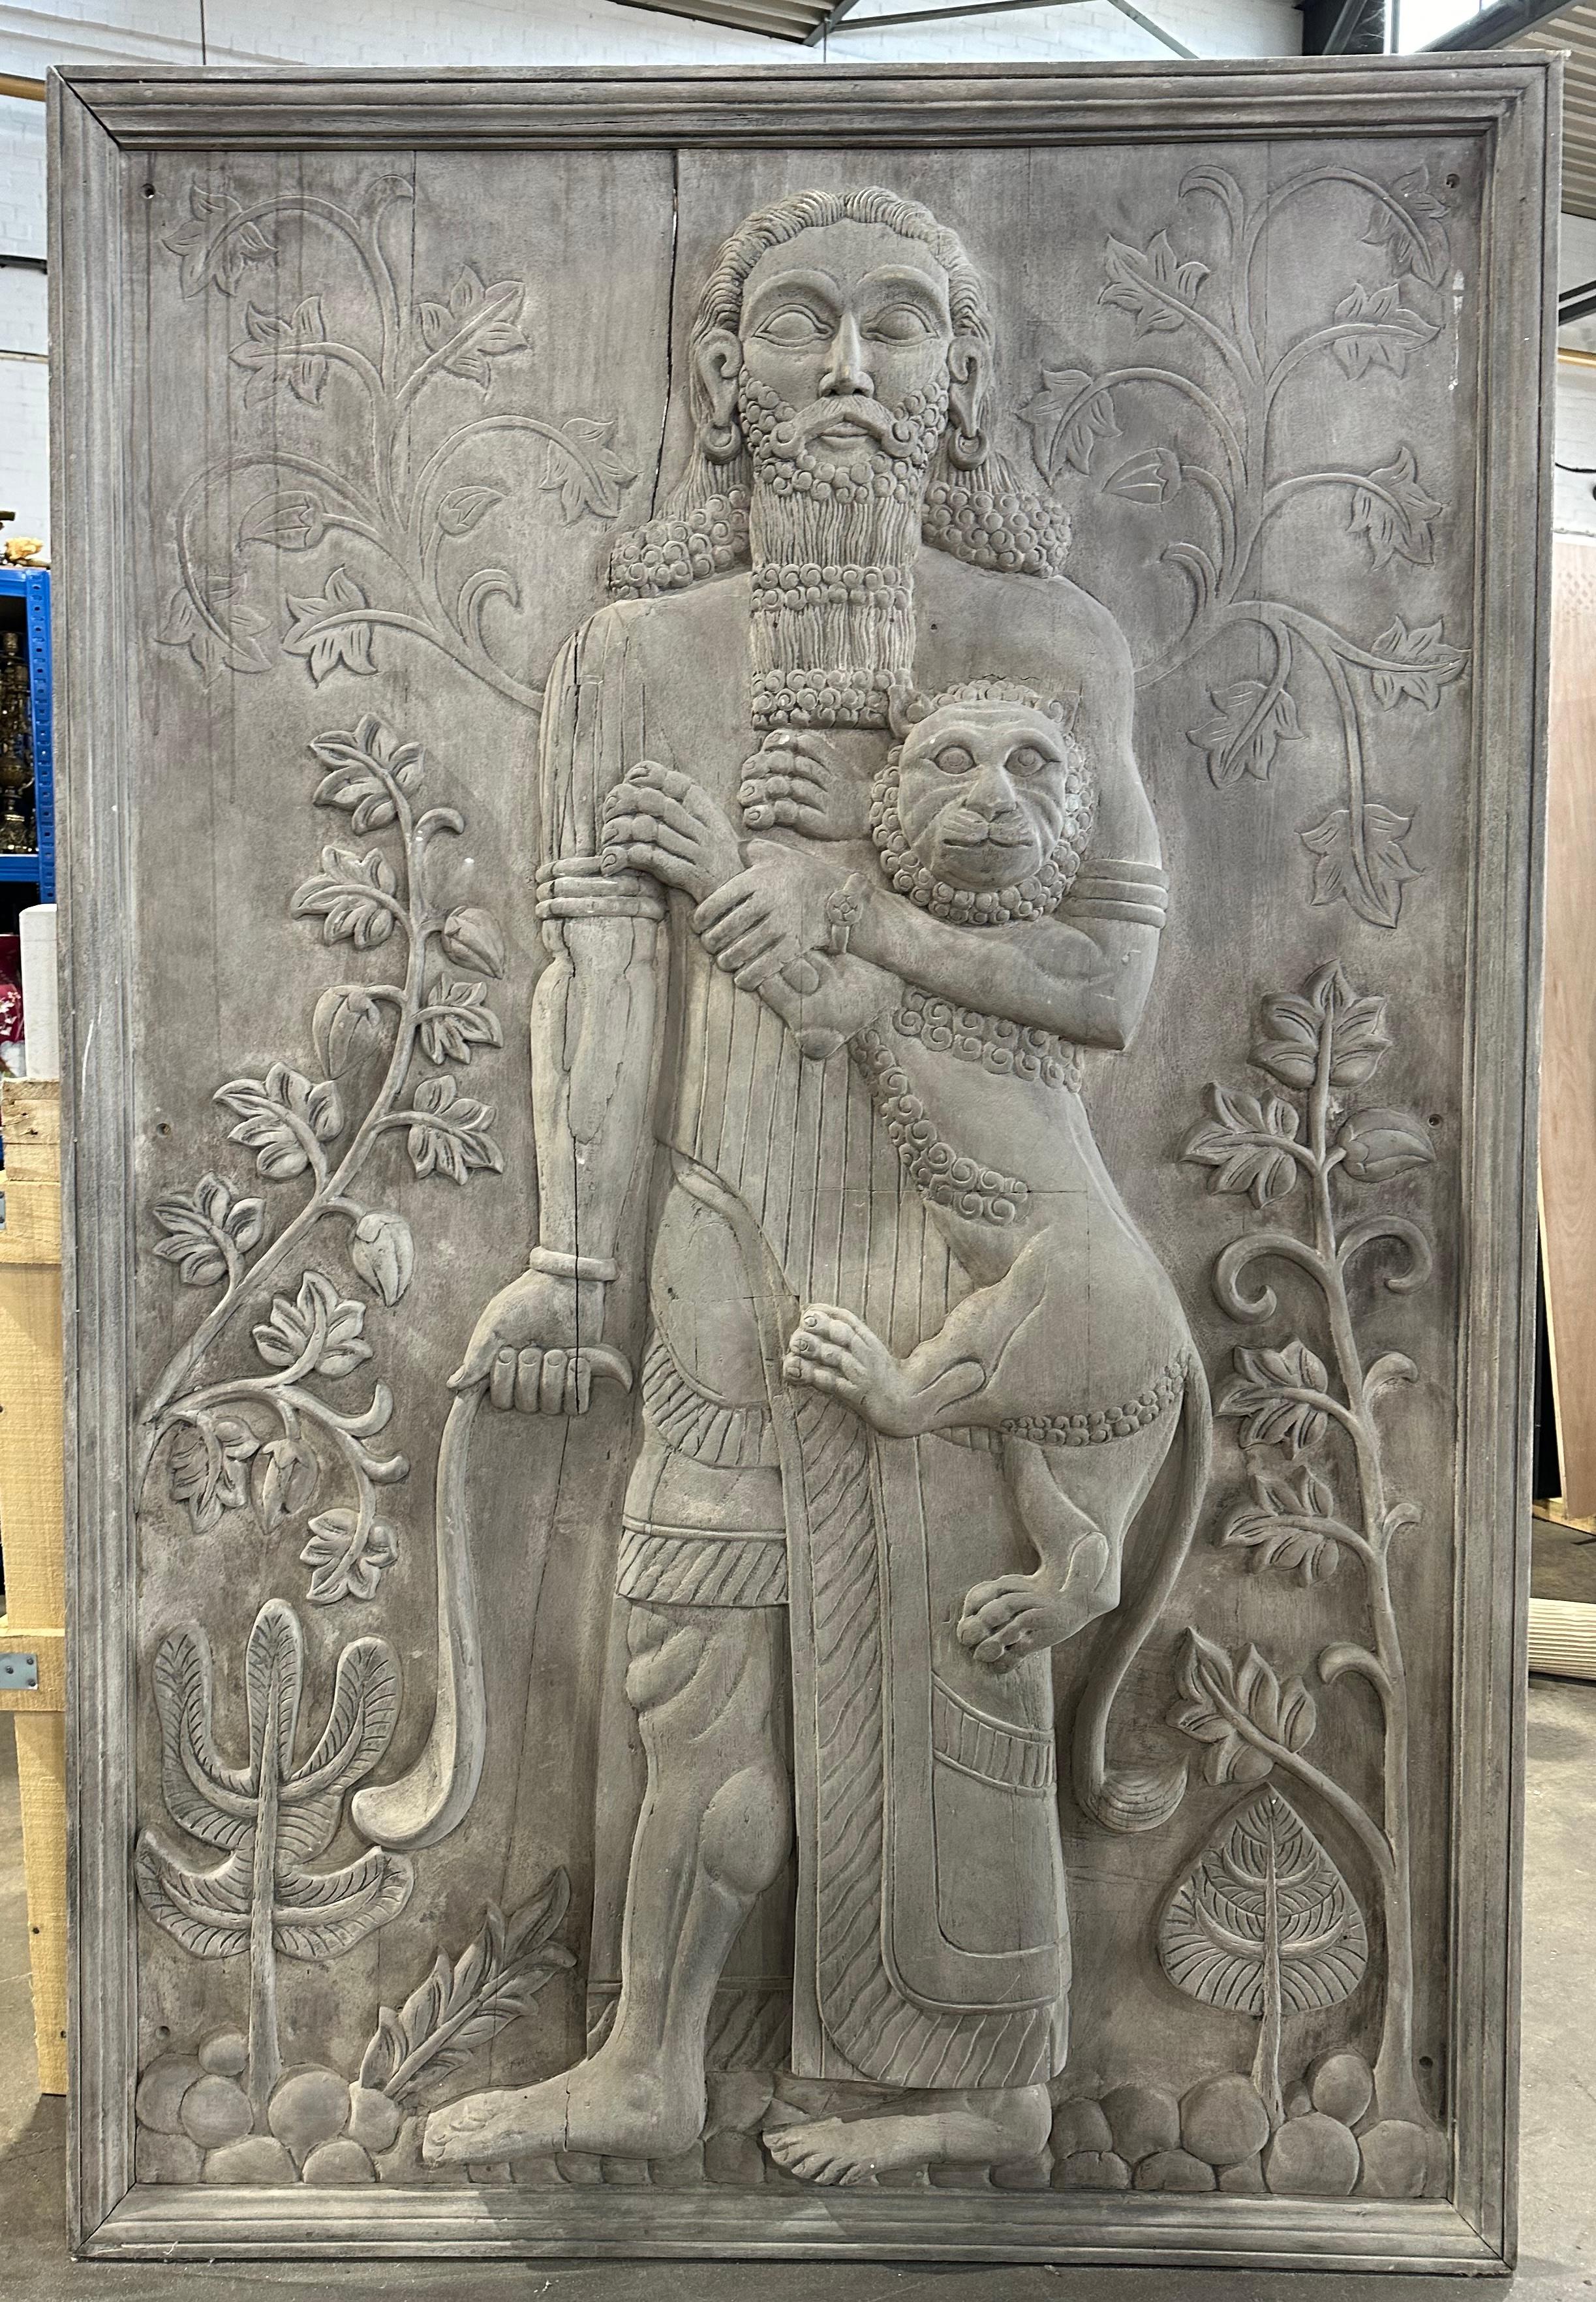 A extremely decorative large pair of carved wall panels. These panels are well carved with lots of detail, showing one male and one female figure. The carving is elaborate with depth, intricate curling foliage and minute detail such as the males